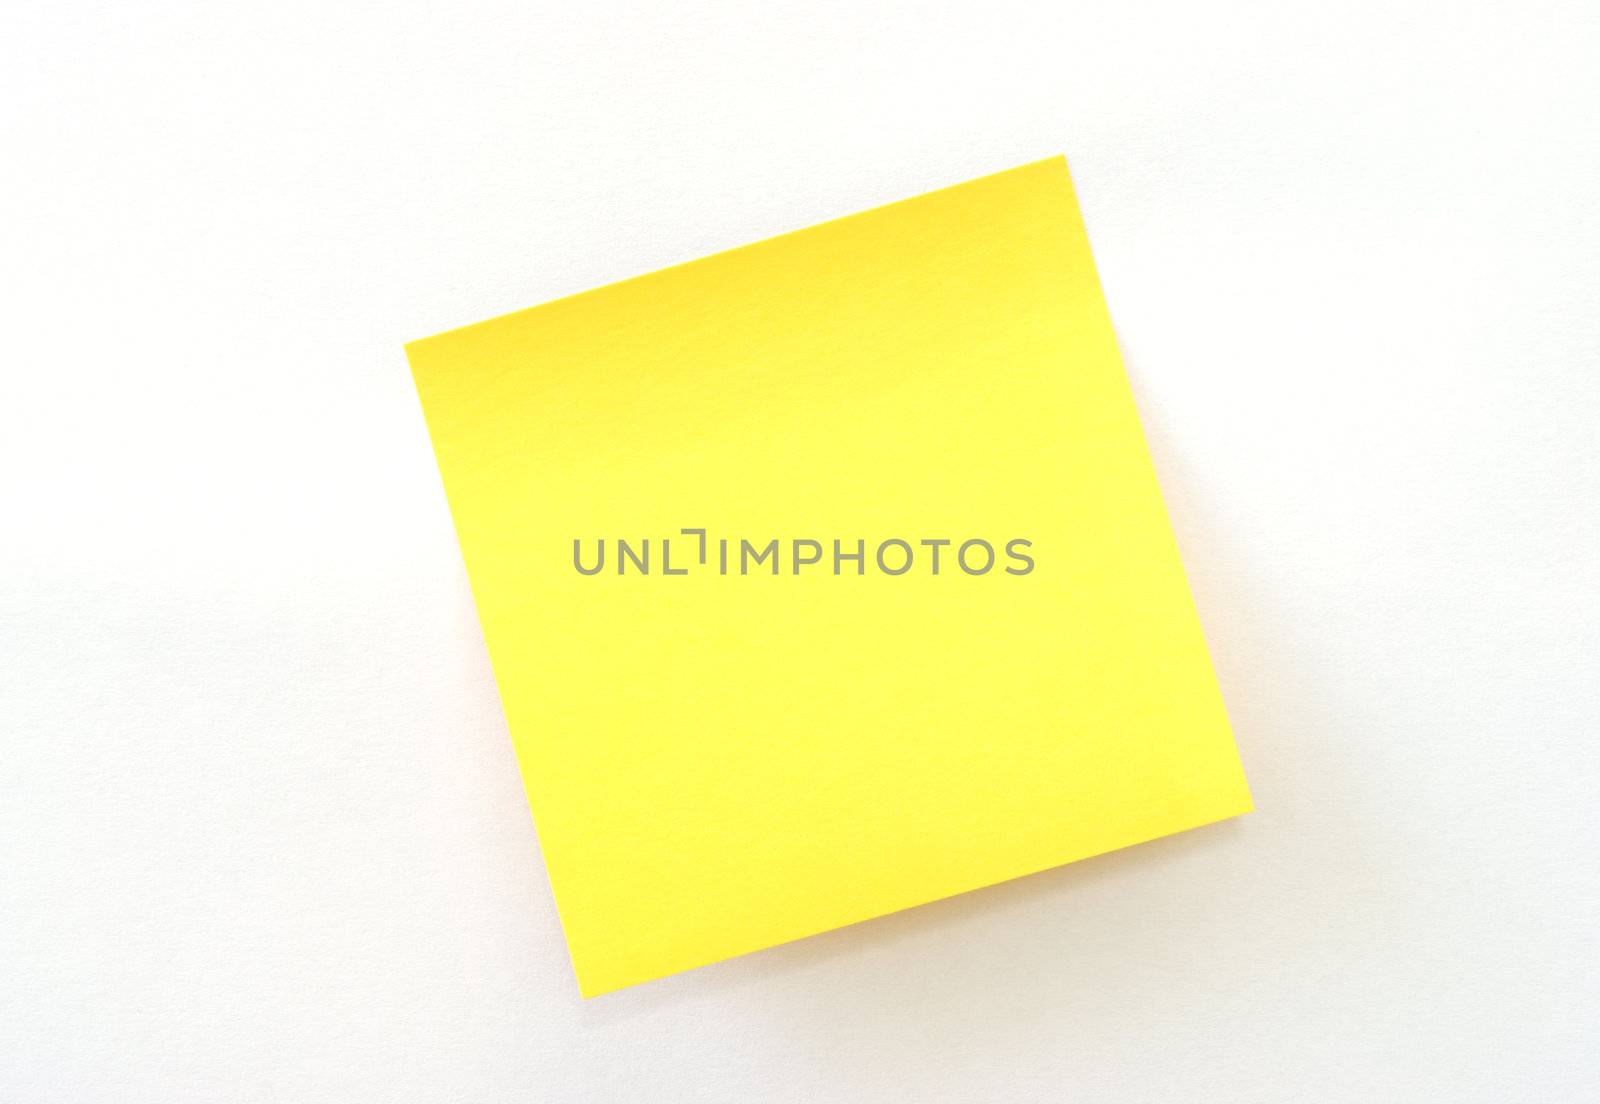 An isolated yellow sticky note on white background.